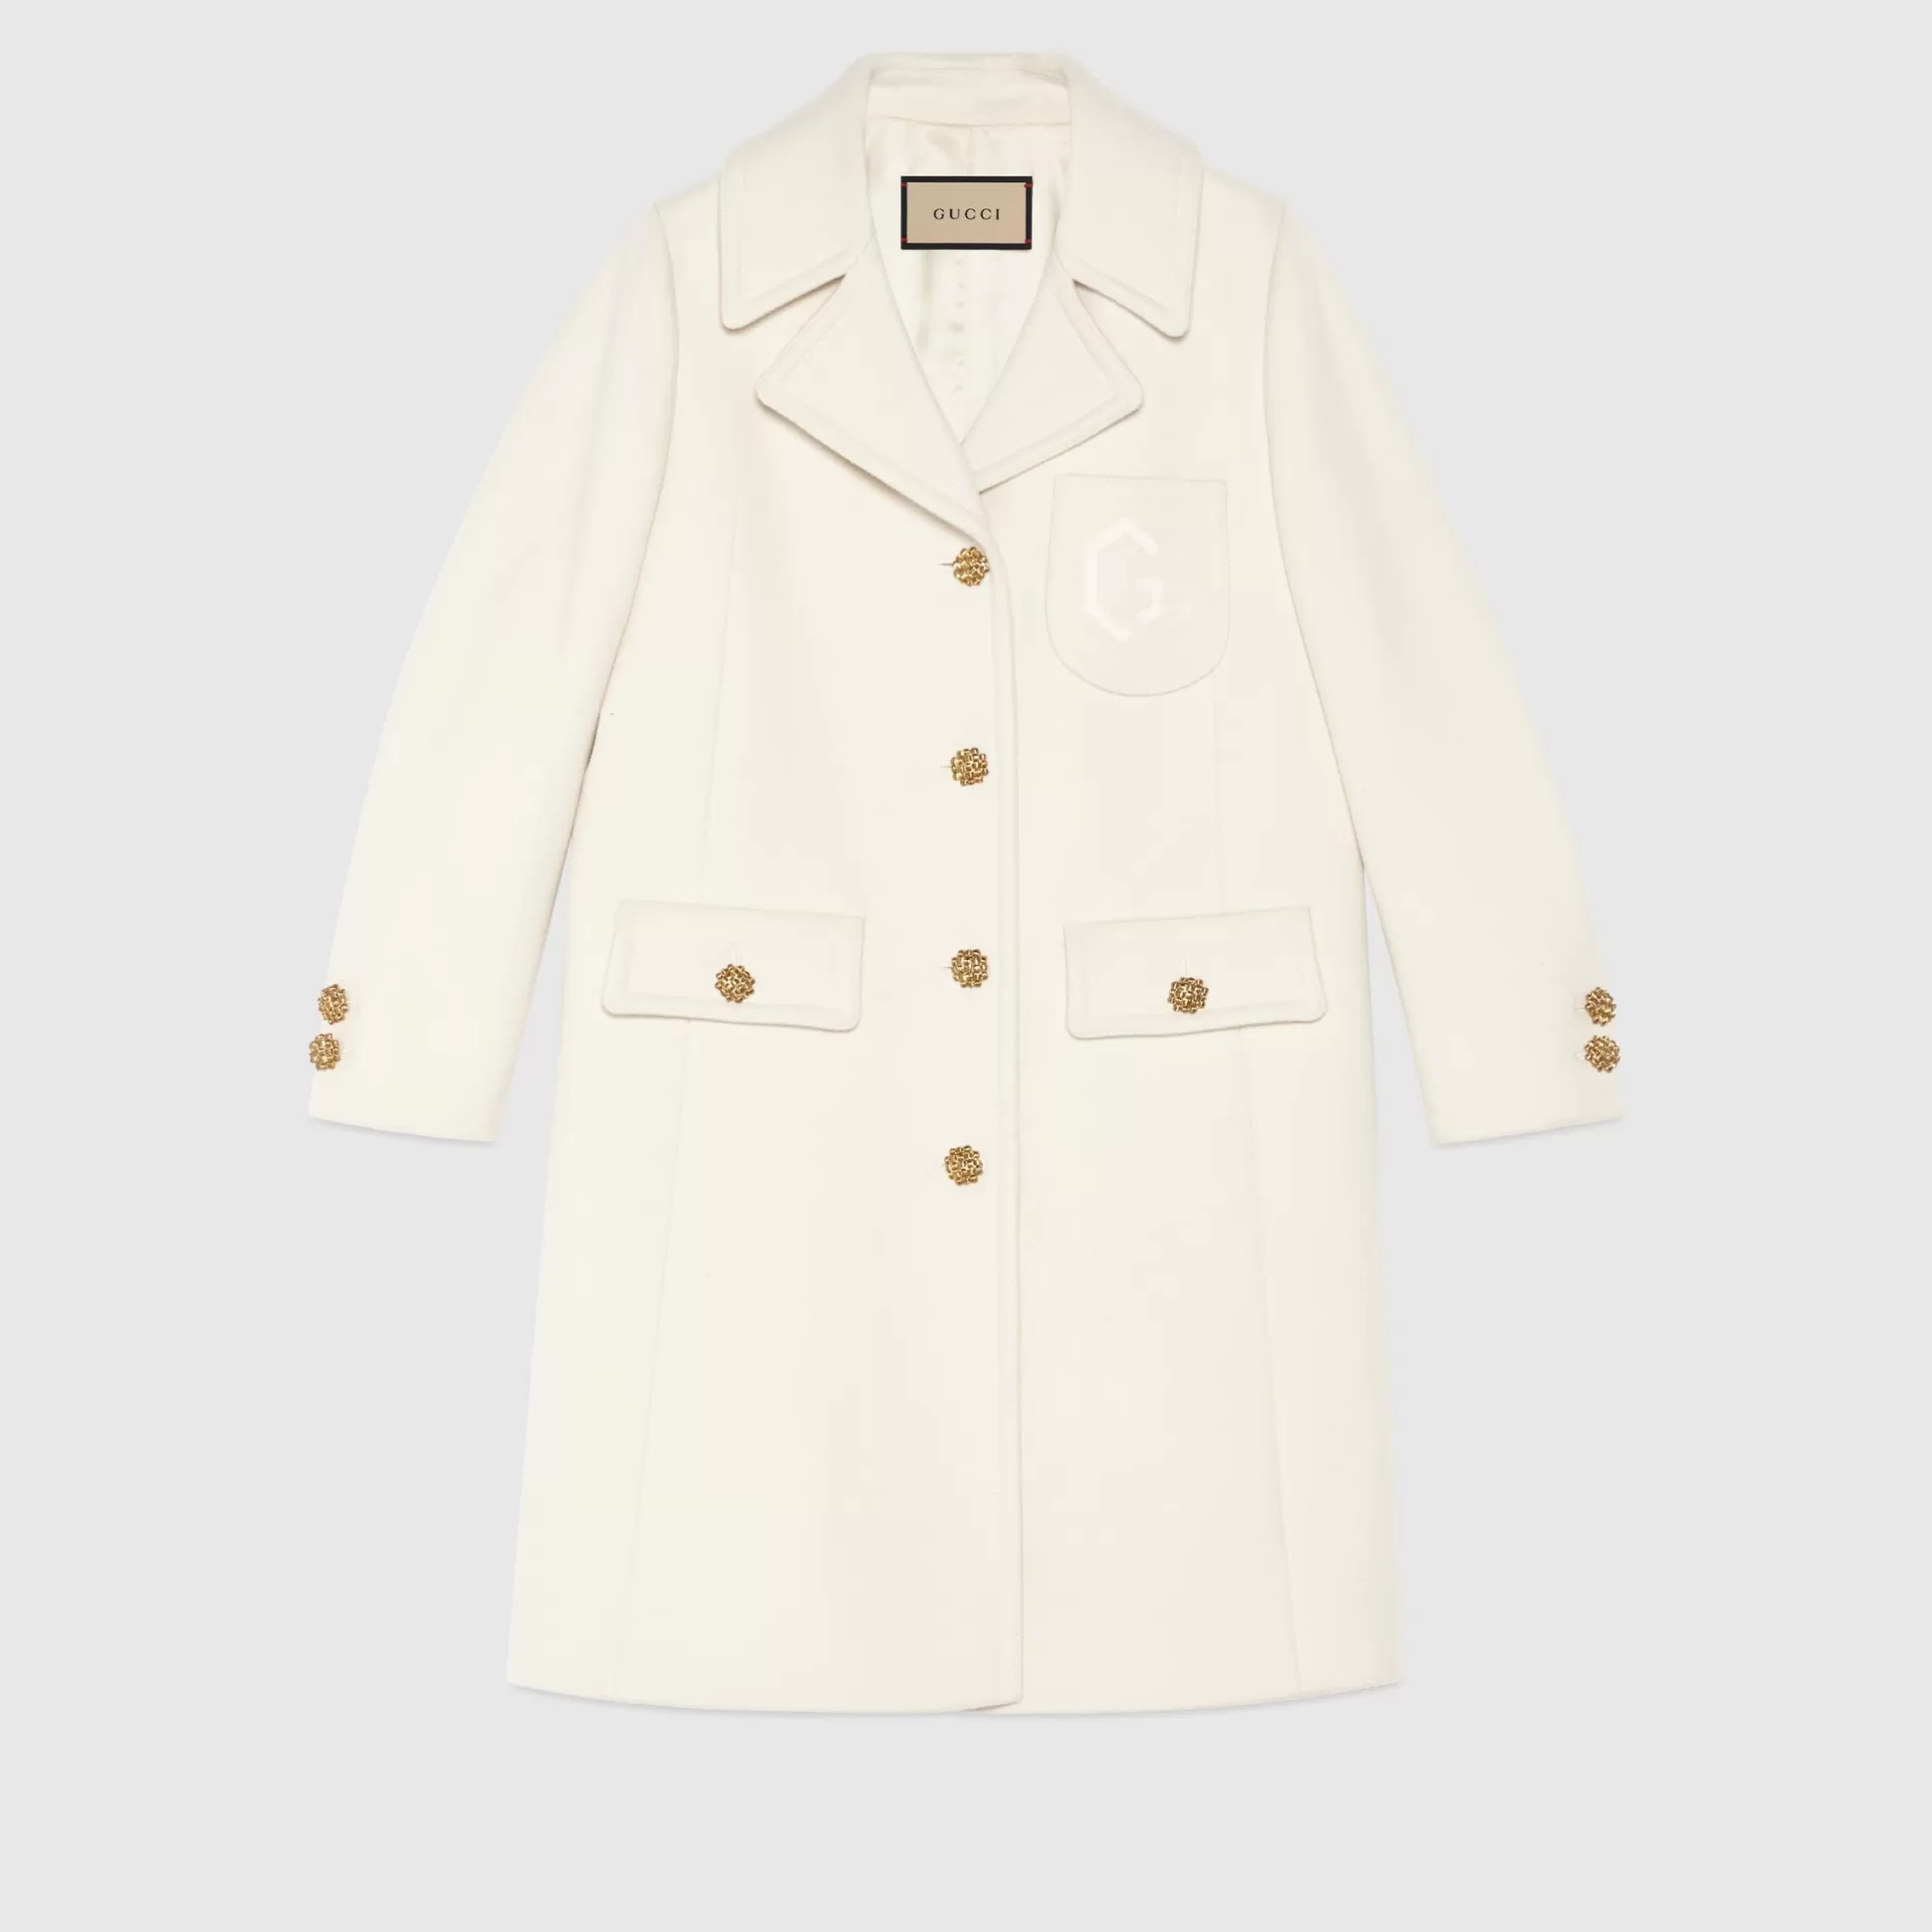 GUCCI Double G Embroidery Wool Coat-Women Coats & Jackets